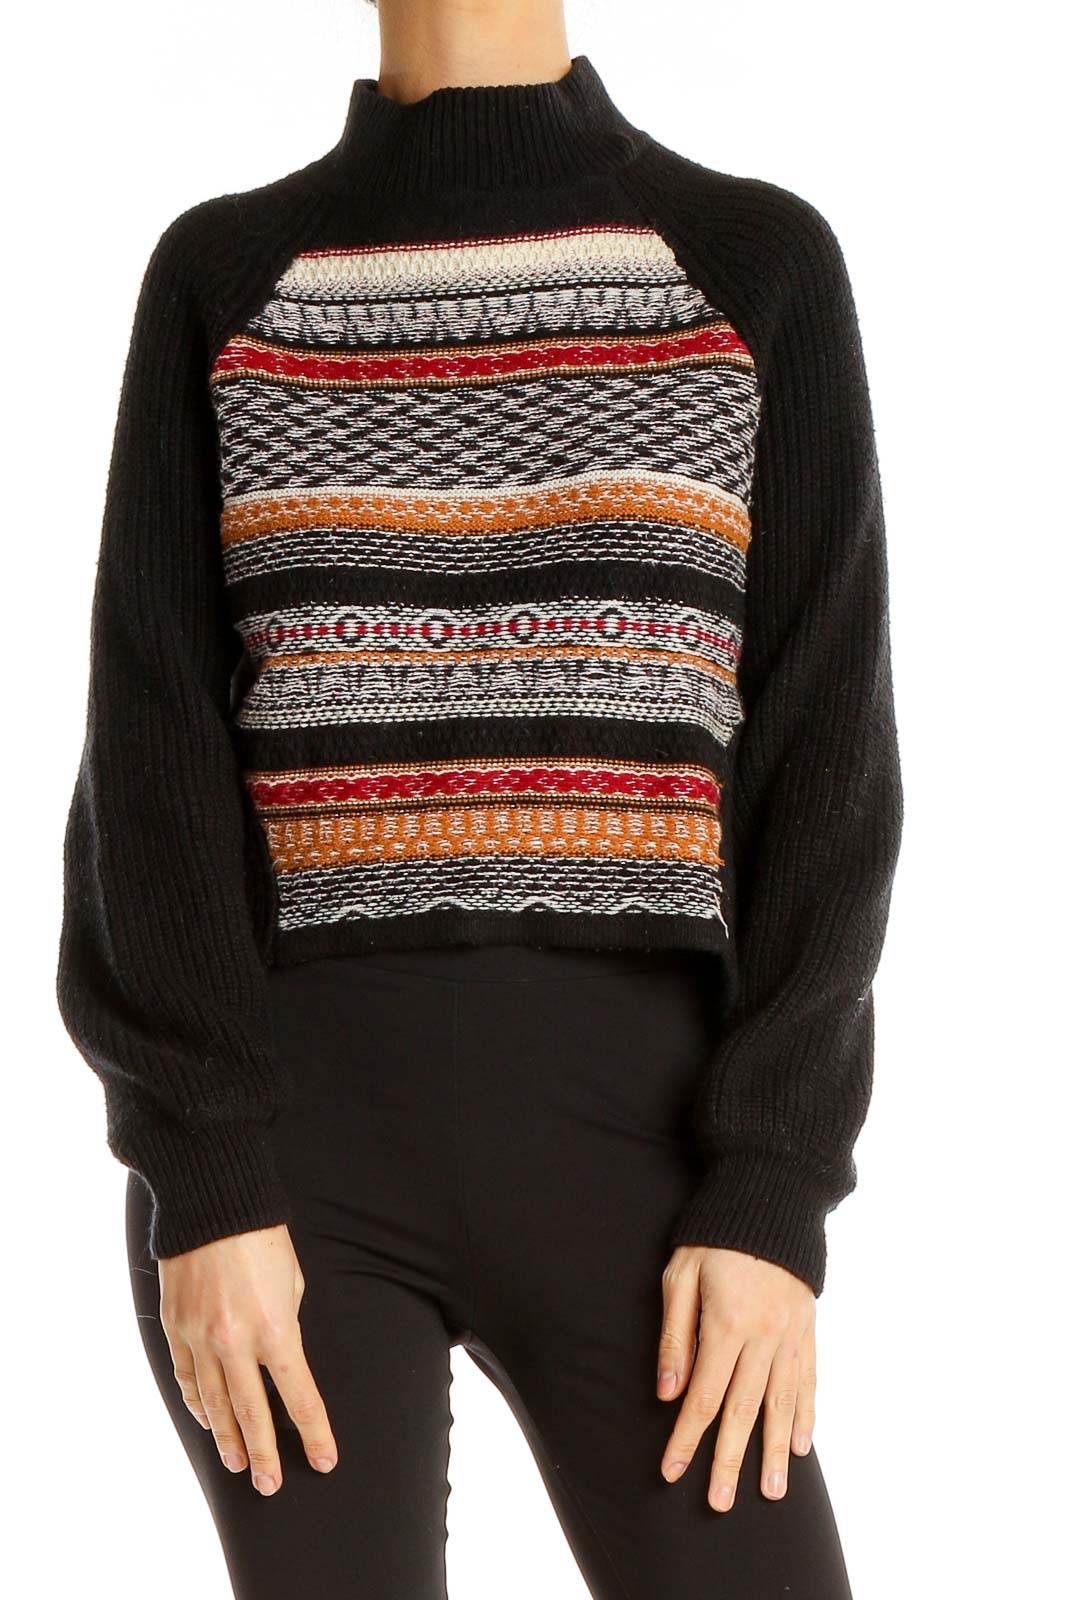 Black Embroidered All Day Wear Sweater Front